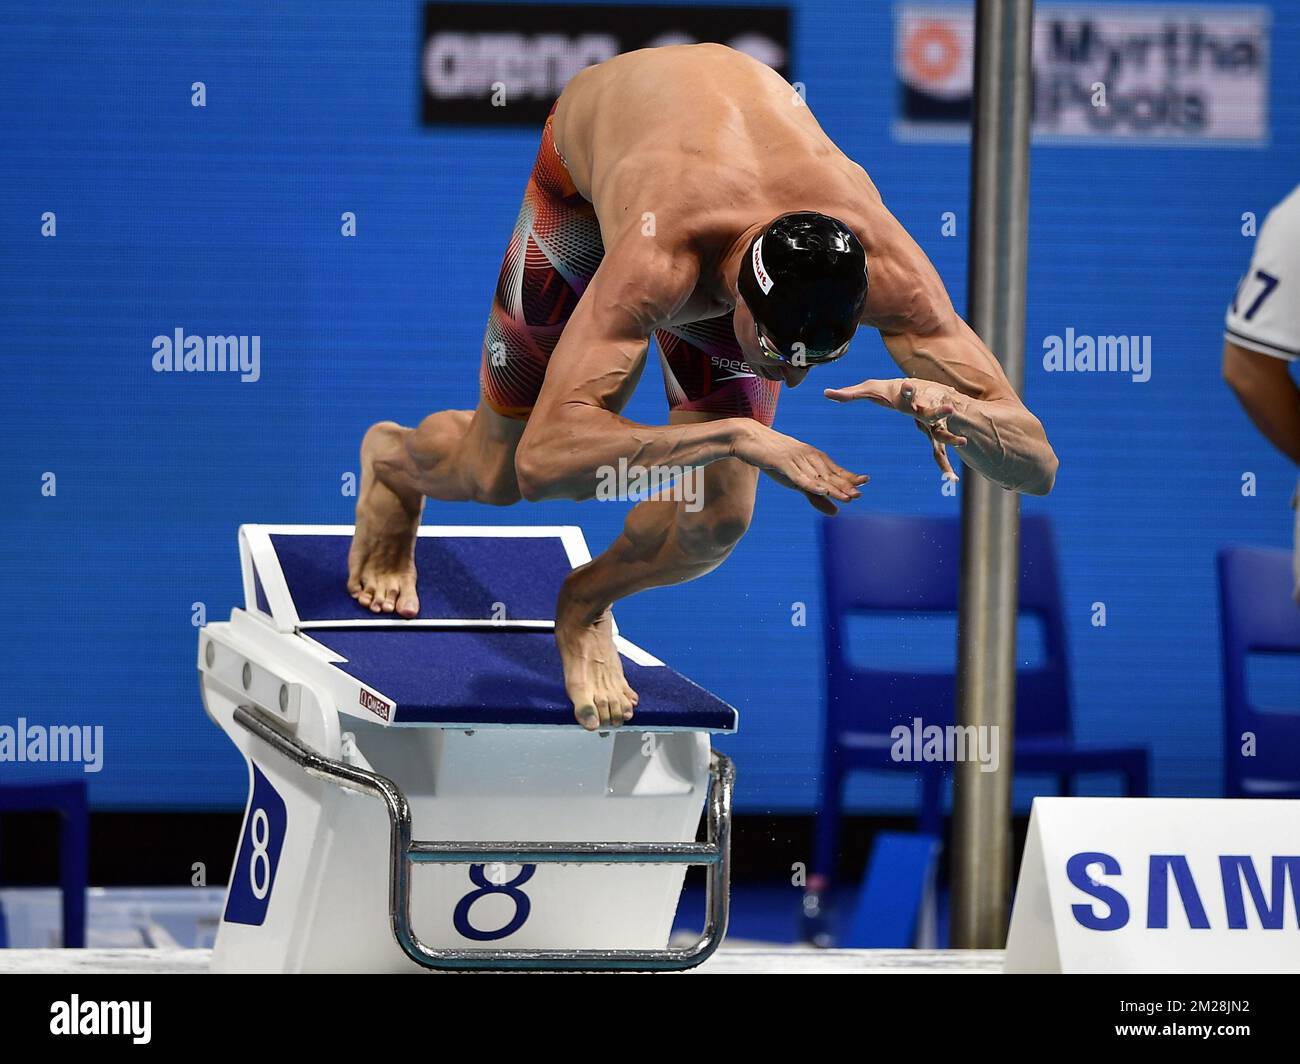 Belgian swimmer Pieter Timmers pictured in action during the heats of the men's 200m freestyle competition at the World Championships in Budapest, Hungary, Monday 24 July 2017. BELGA PHOTO ERIC LALMAND Stock Photo